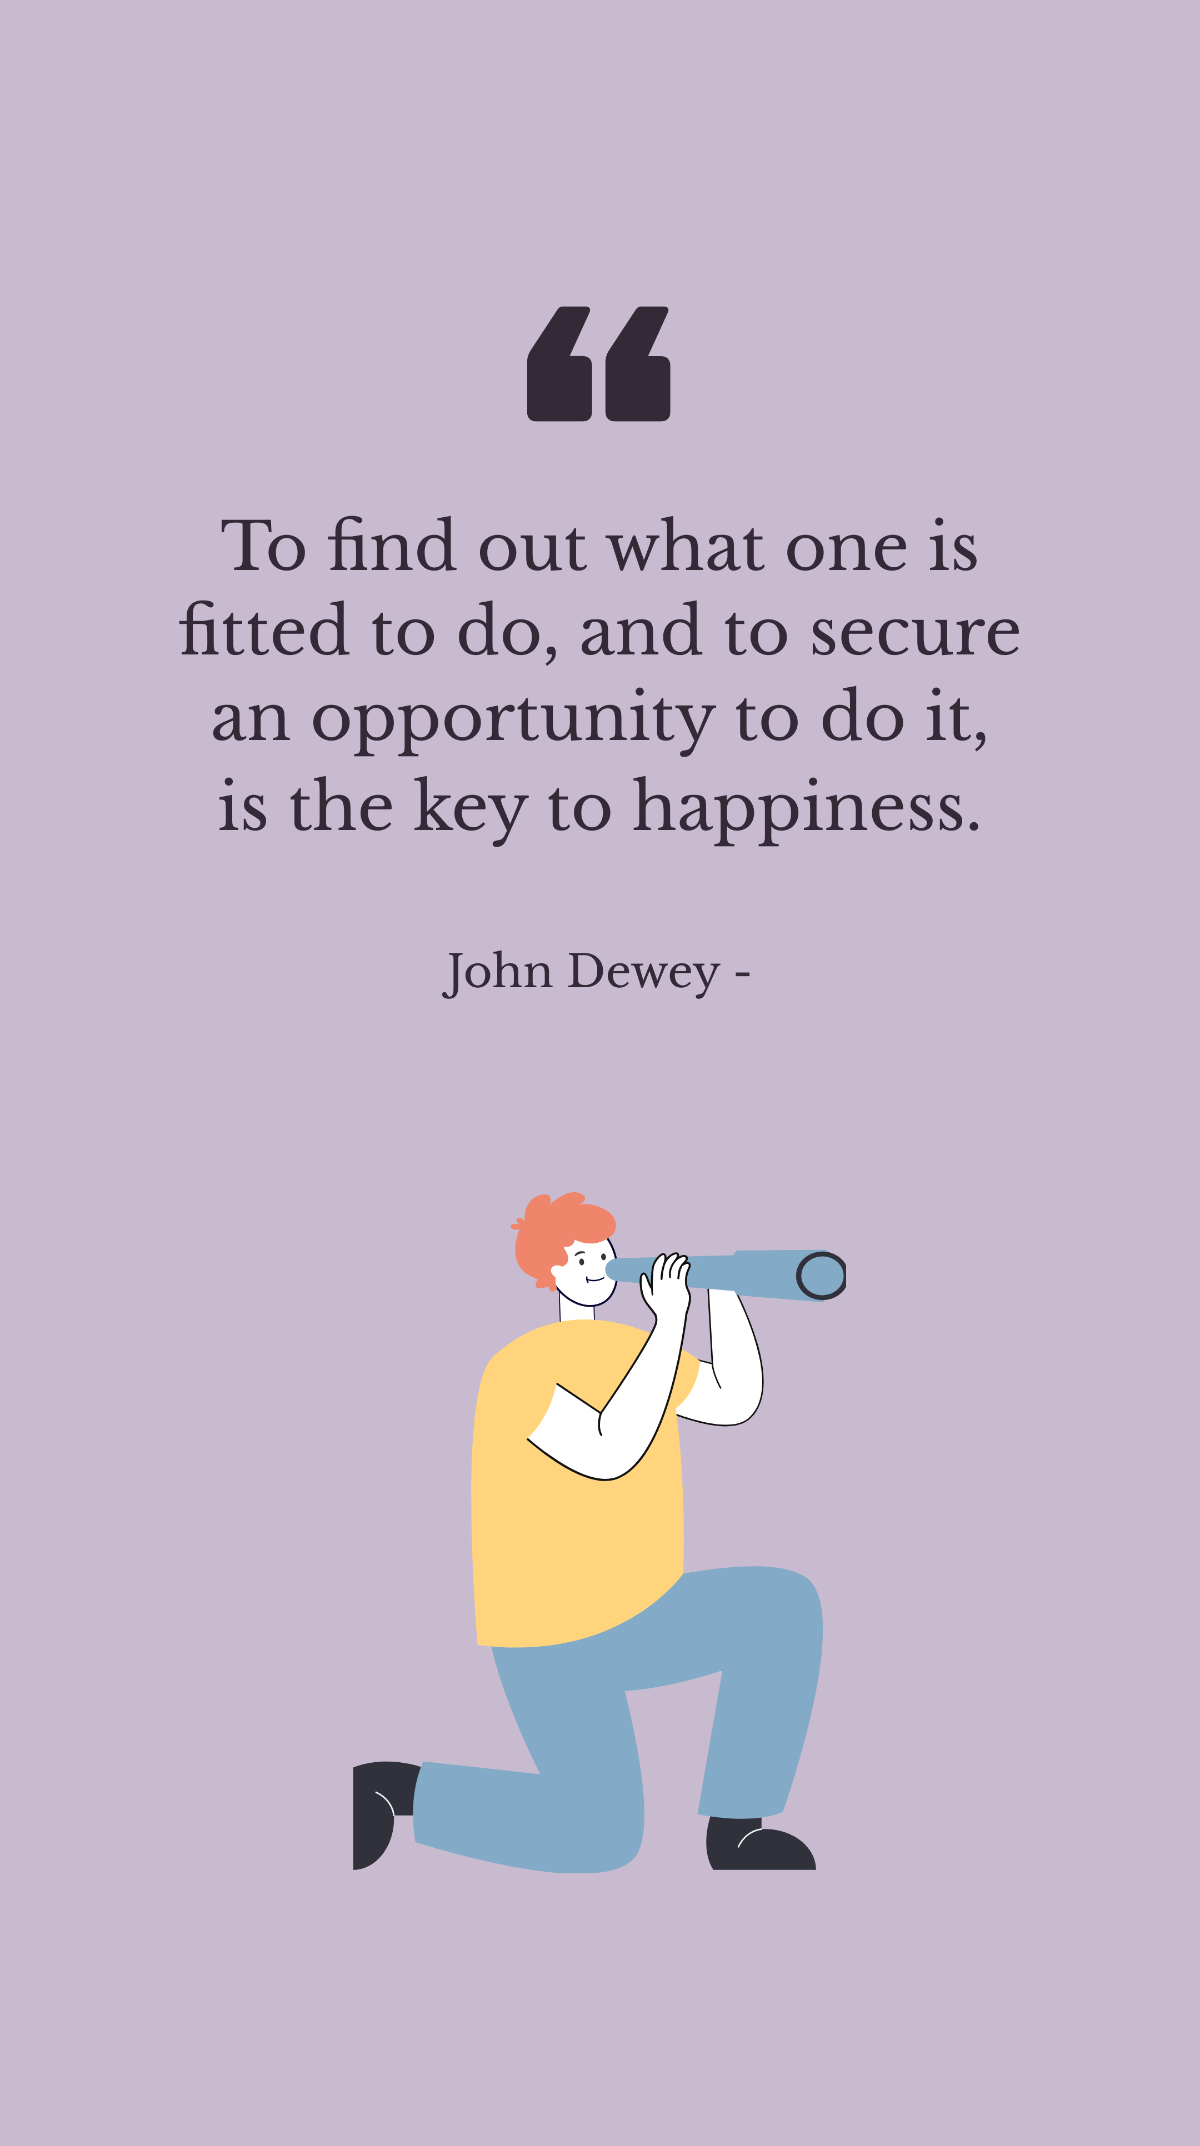 John Dewey - To find out what one is fitted to do, and to secure an opportunity to do it, is the key to happiness. Template